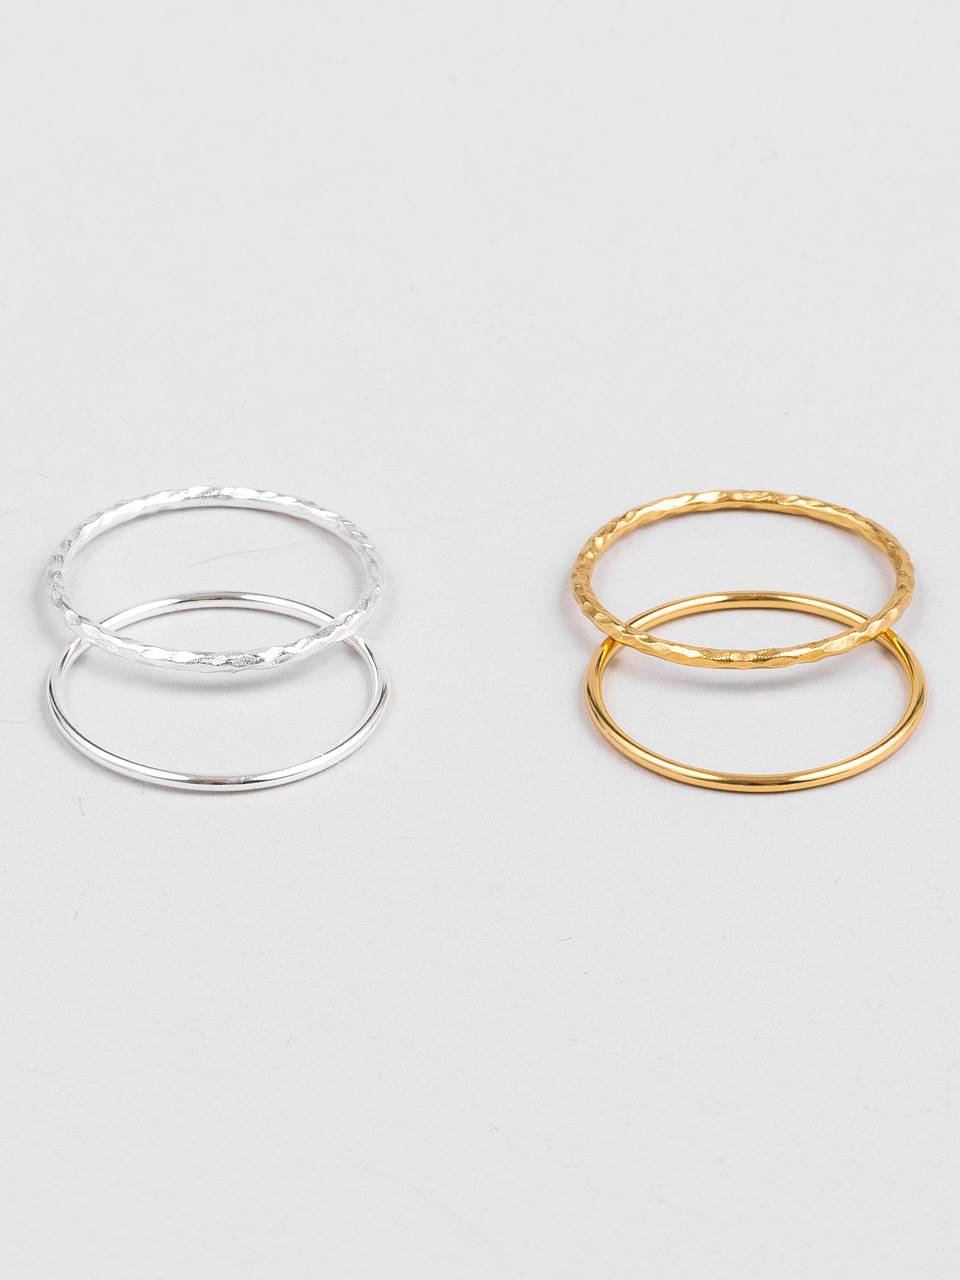 For Mankind Stacking Rings